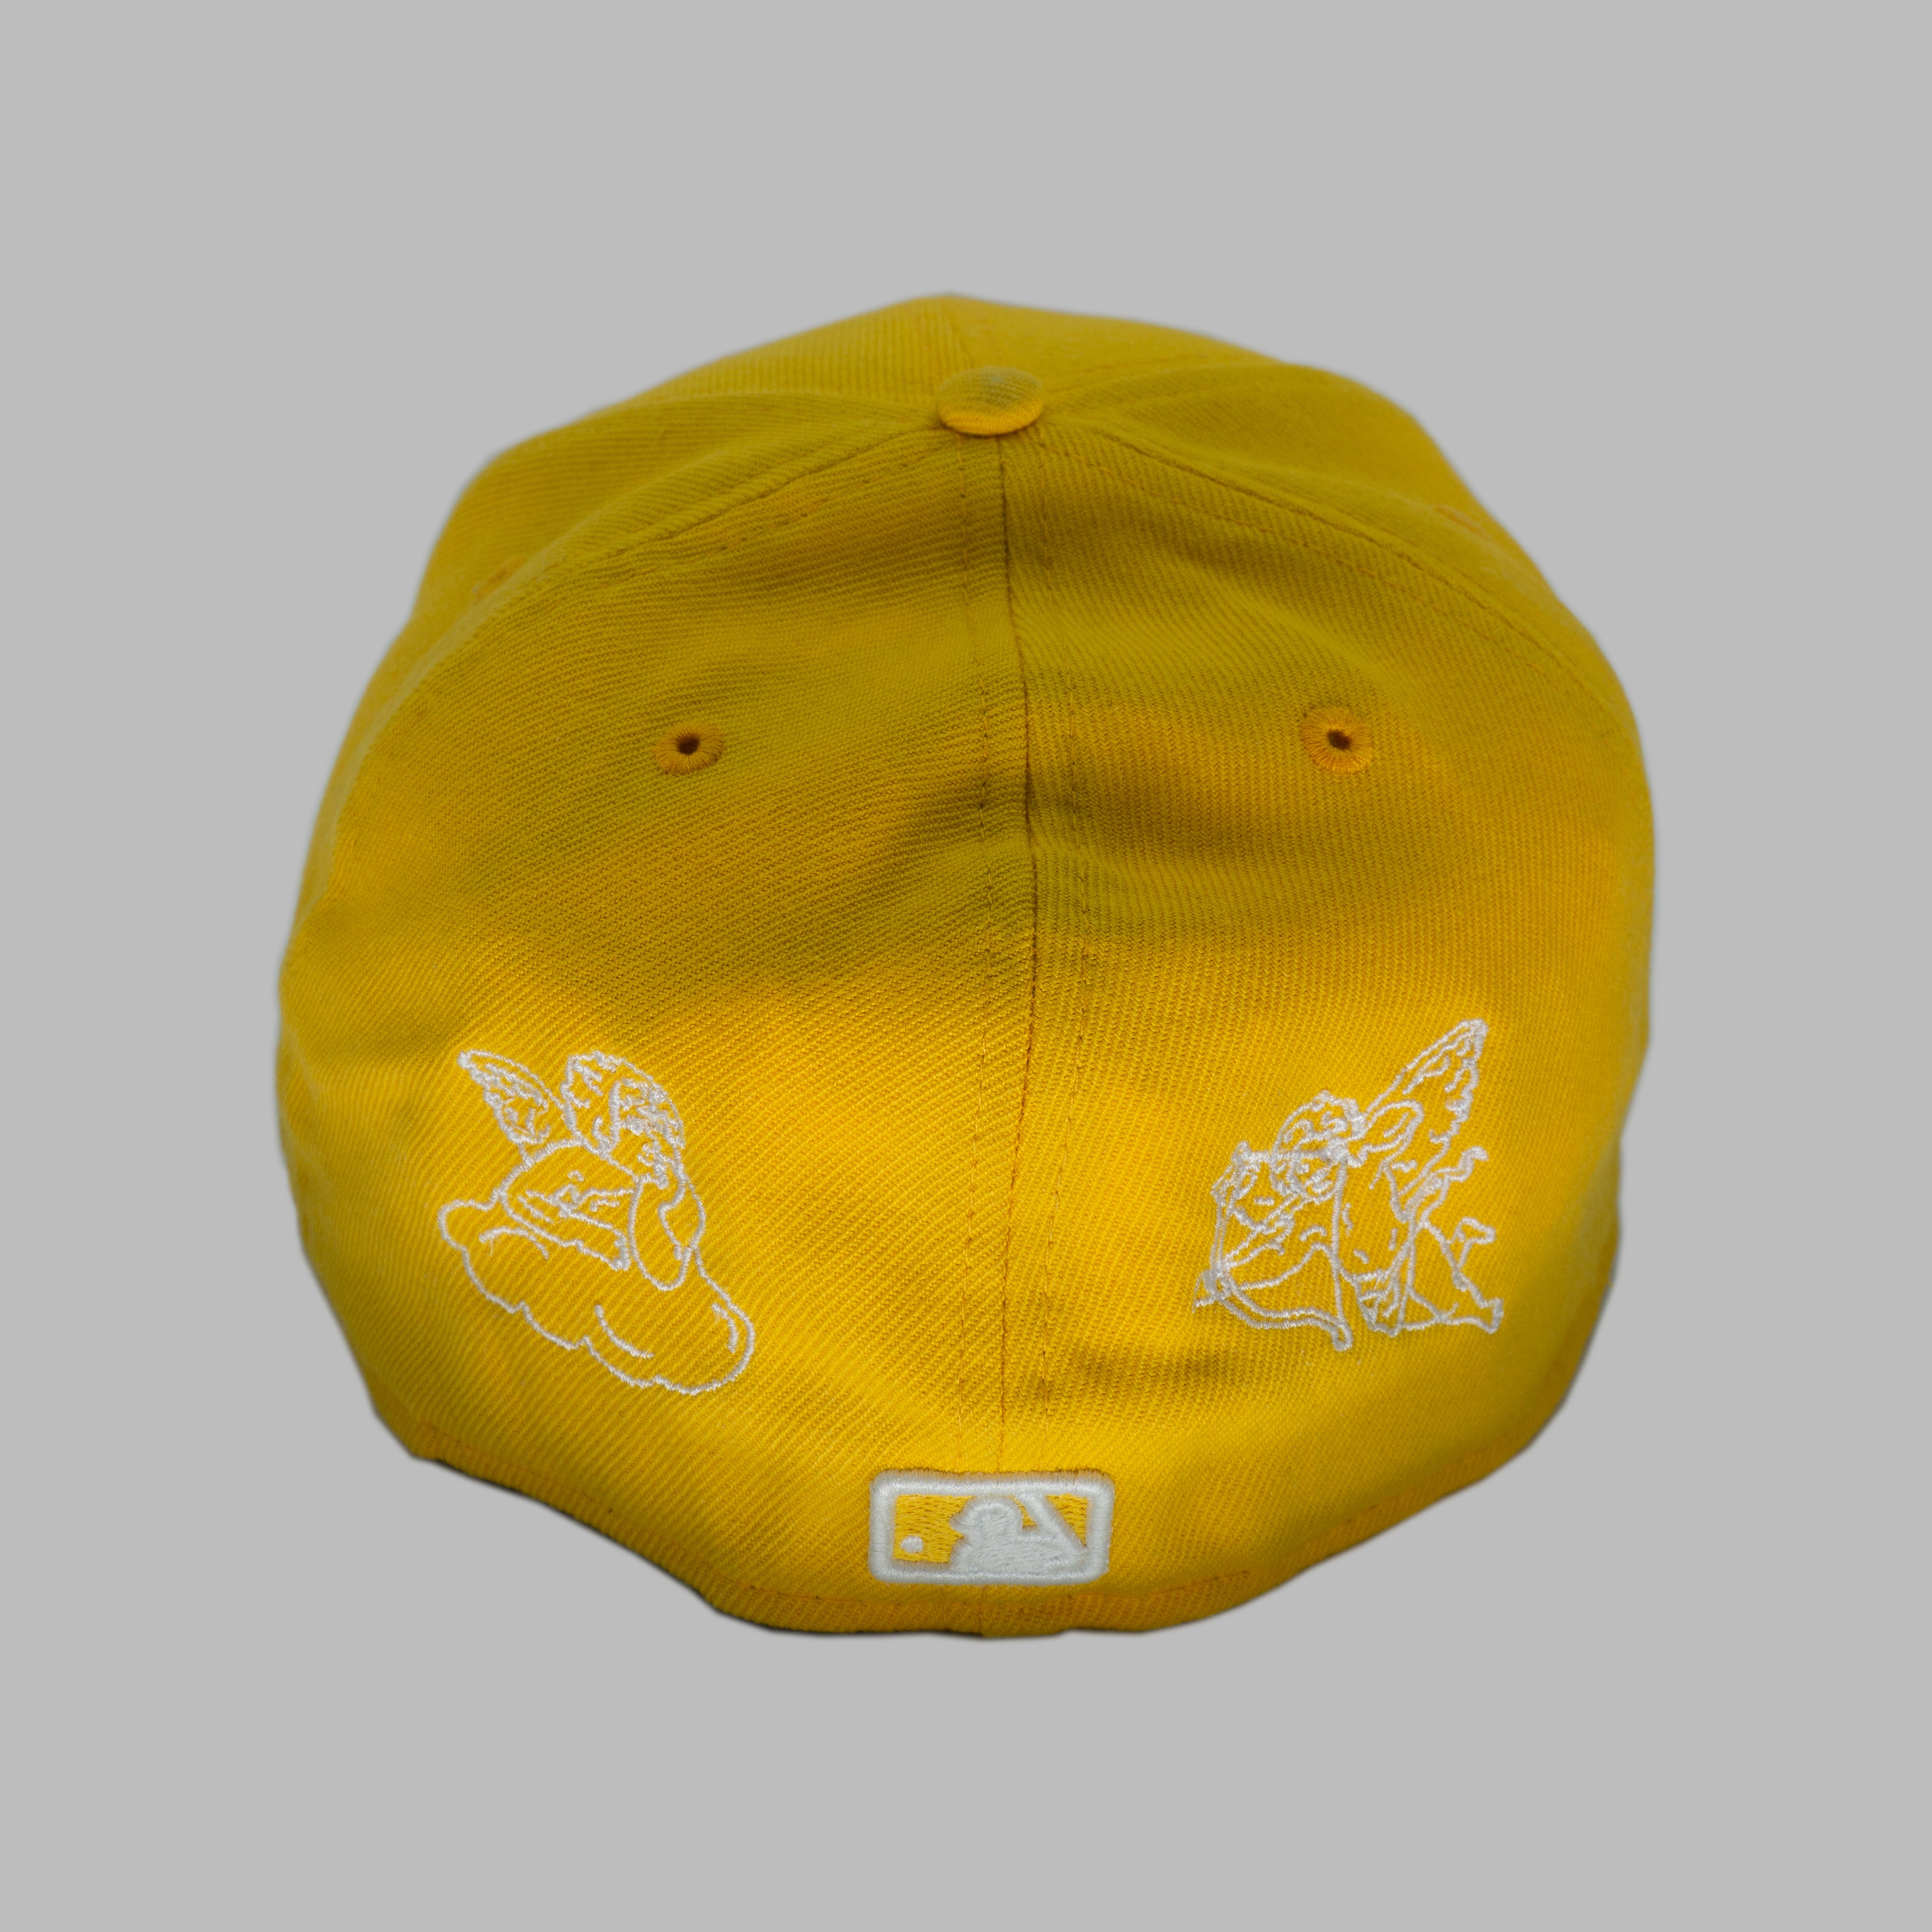 YELLOW HOLY FITTED (size 8)